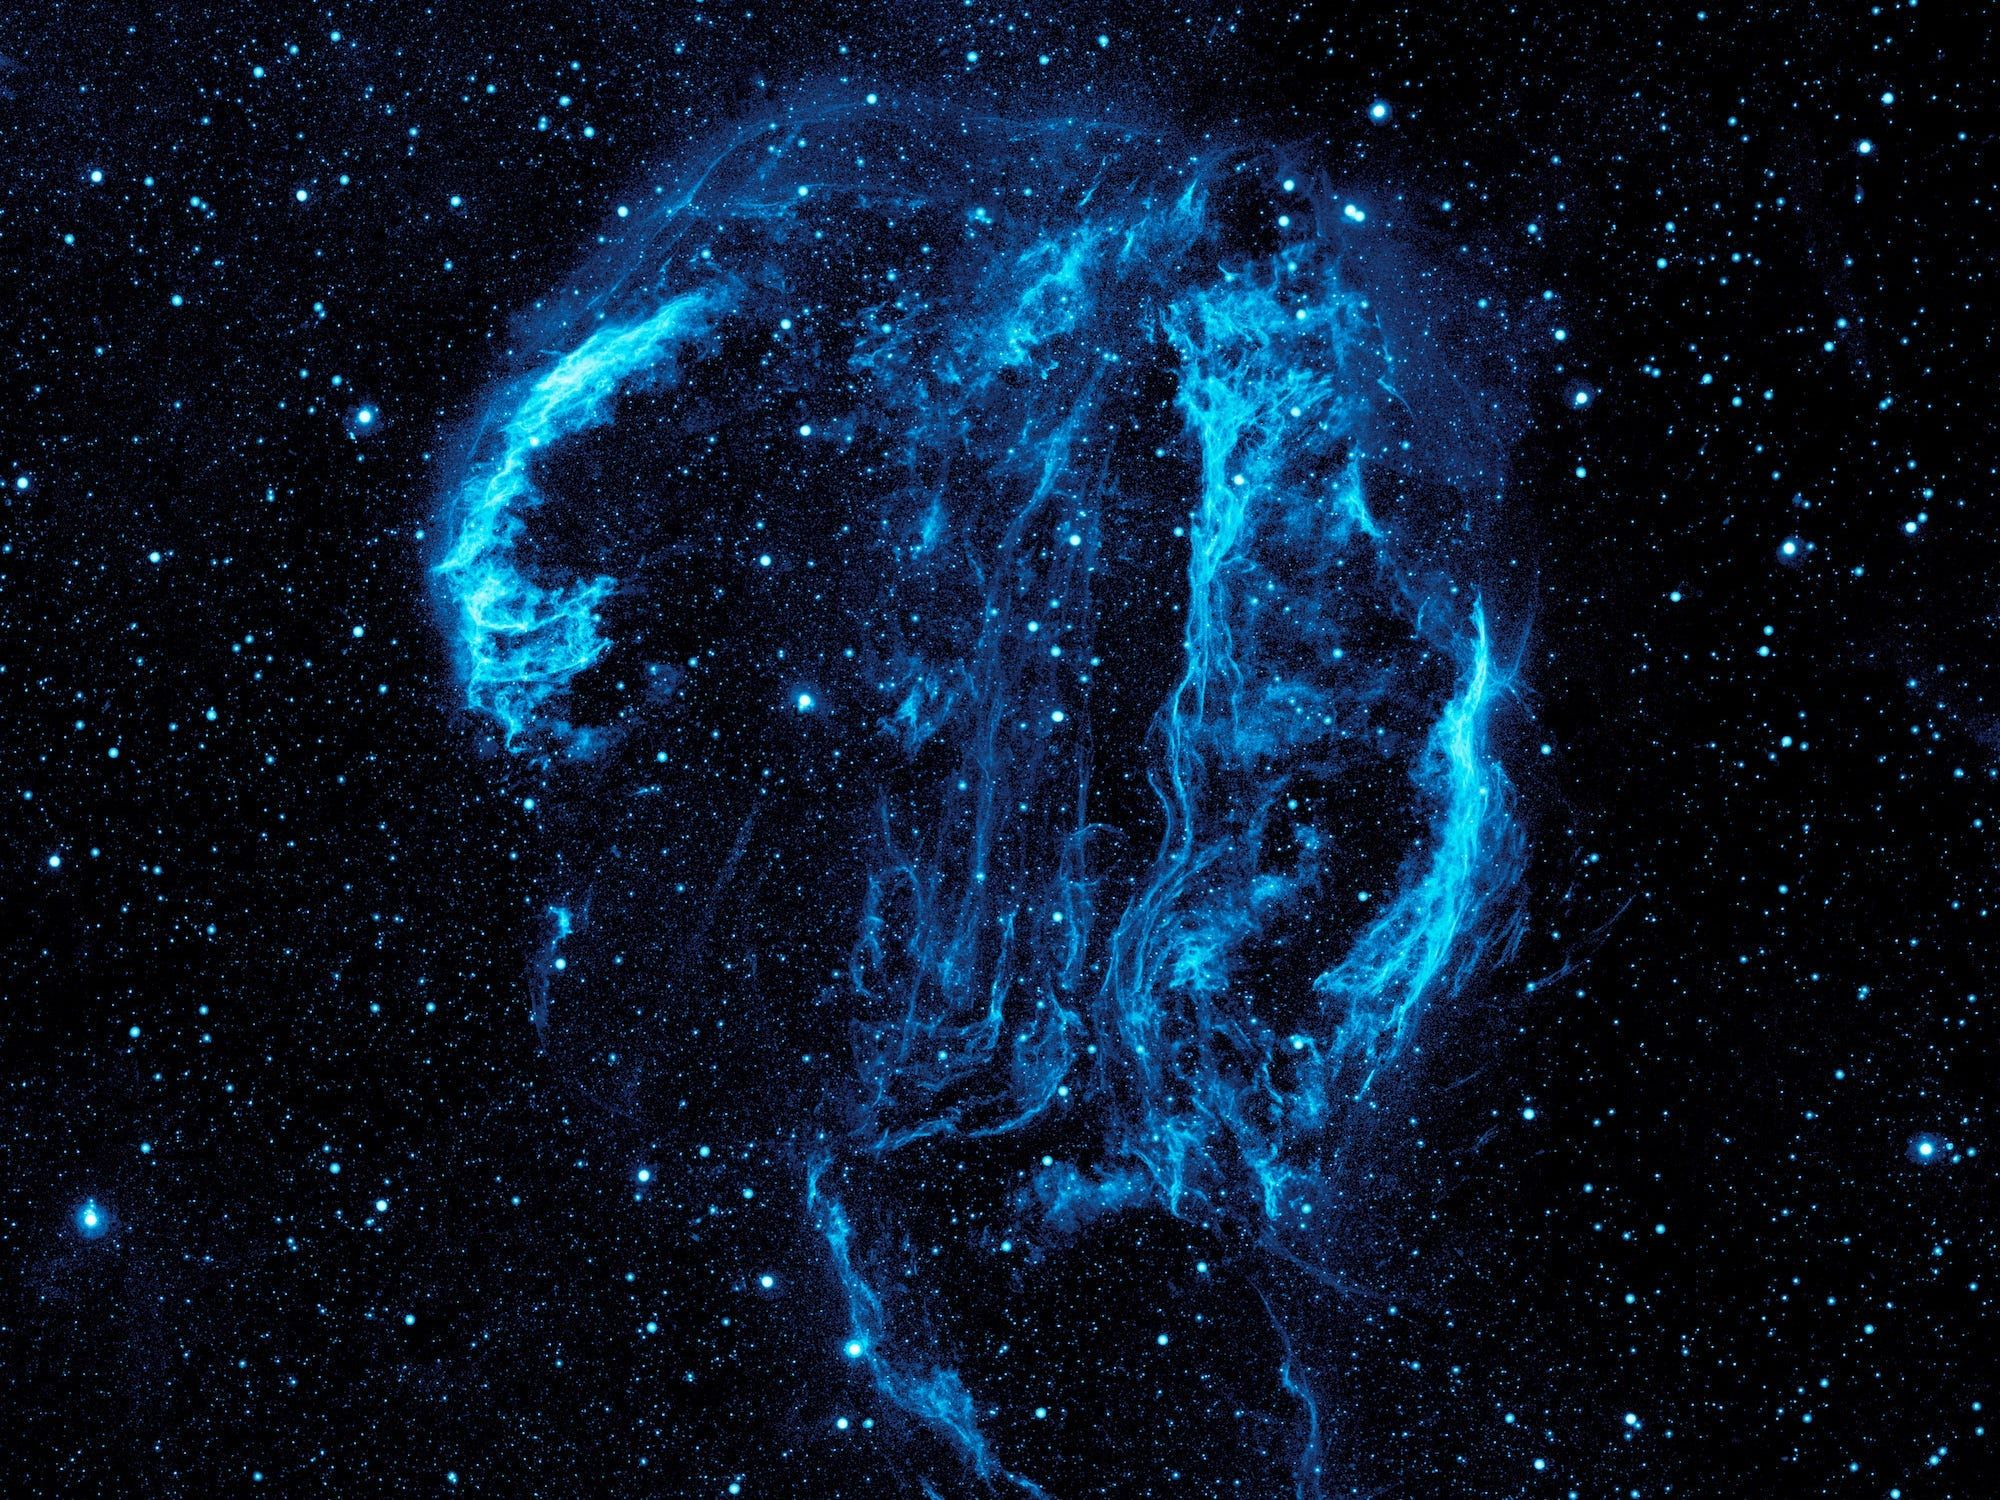 NASA's Hubble space telescope captured the ribbon of a supernova blast that ancient humans saw about 15,000 years ago